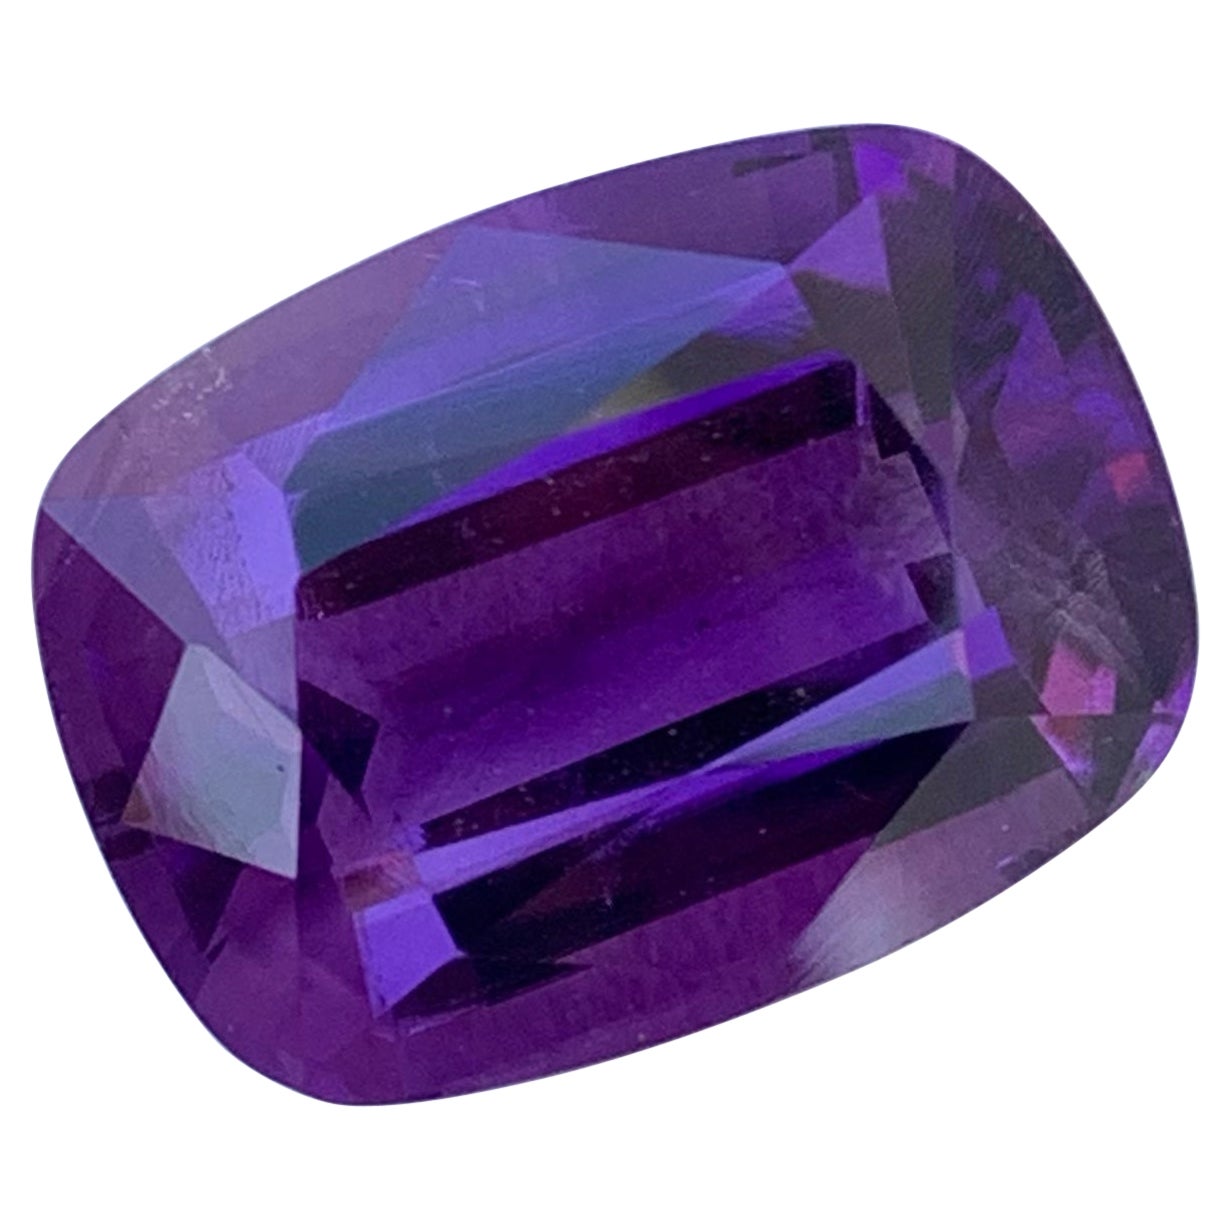 Adorable Loose Amethyst Gemstone Aaa Clean Loose Amethyst for Jewelry 12.10 Ct  For Sale